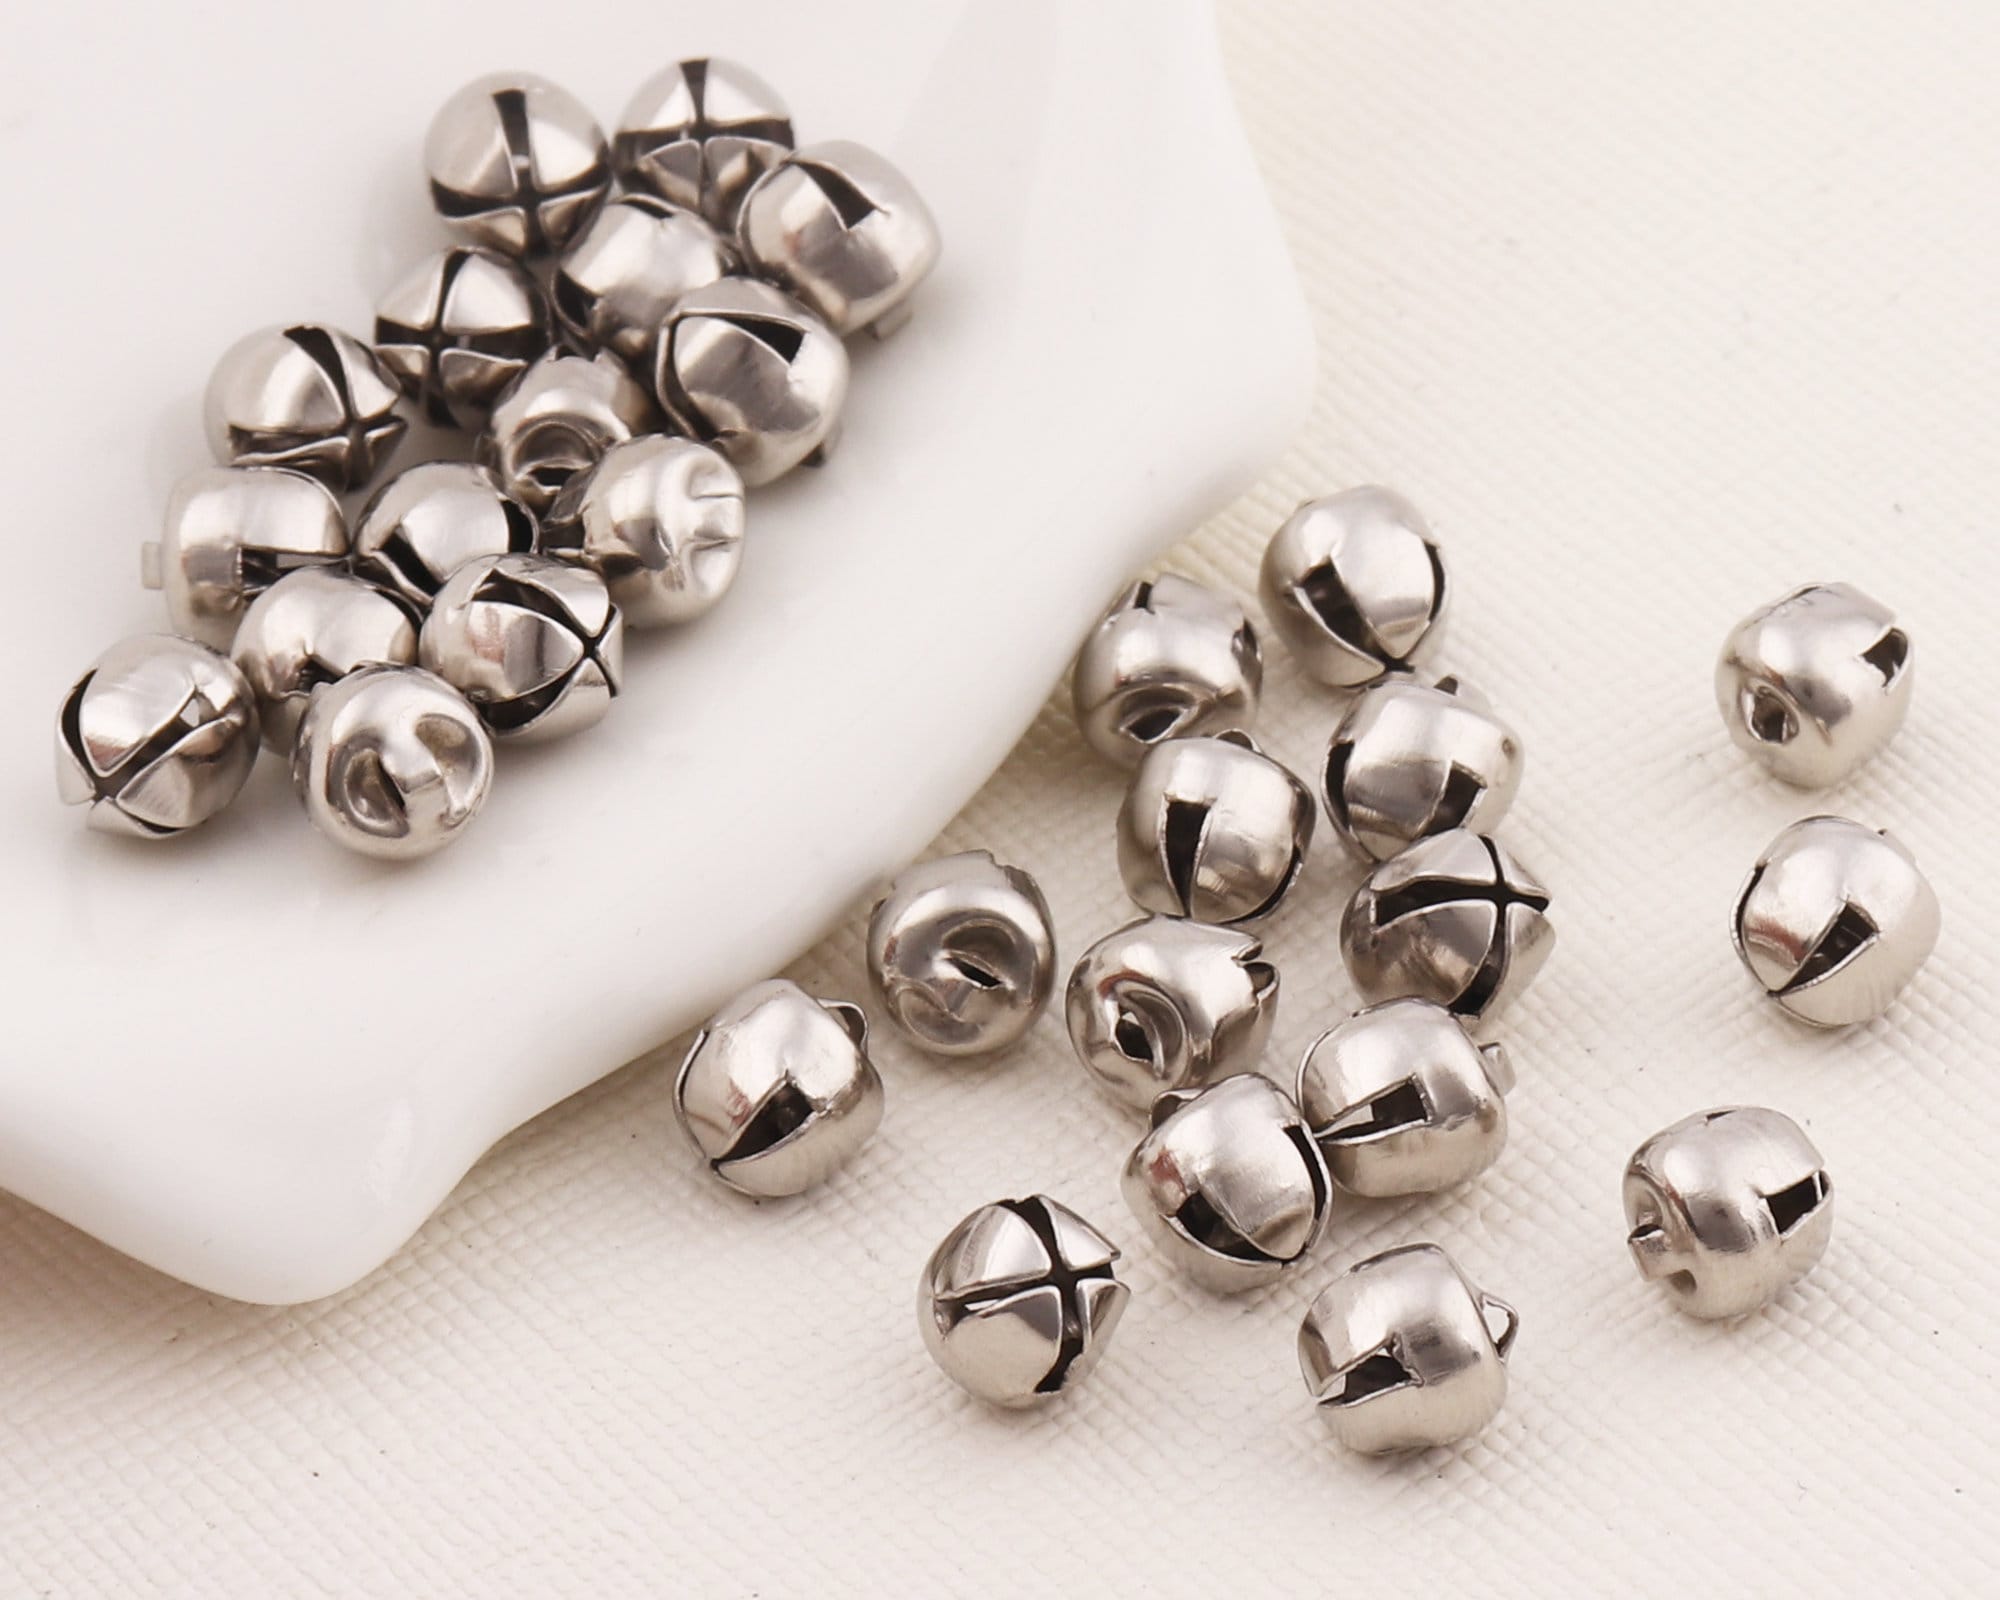 300Pcs Small Bells 6mm Mini Bells,Pendant Bell Set, Iron Material Silver  Mini Pendant for Jewelry Making and Crafting